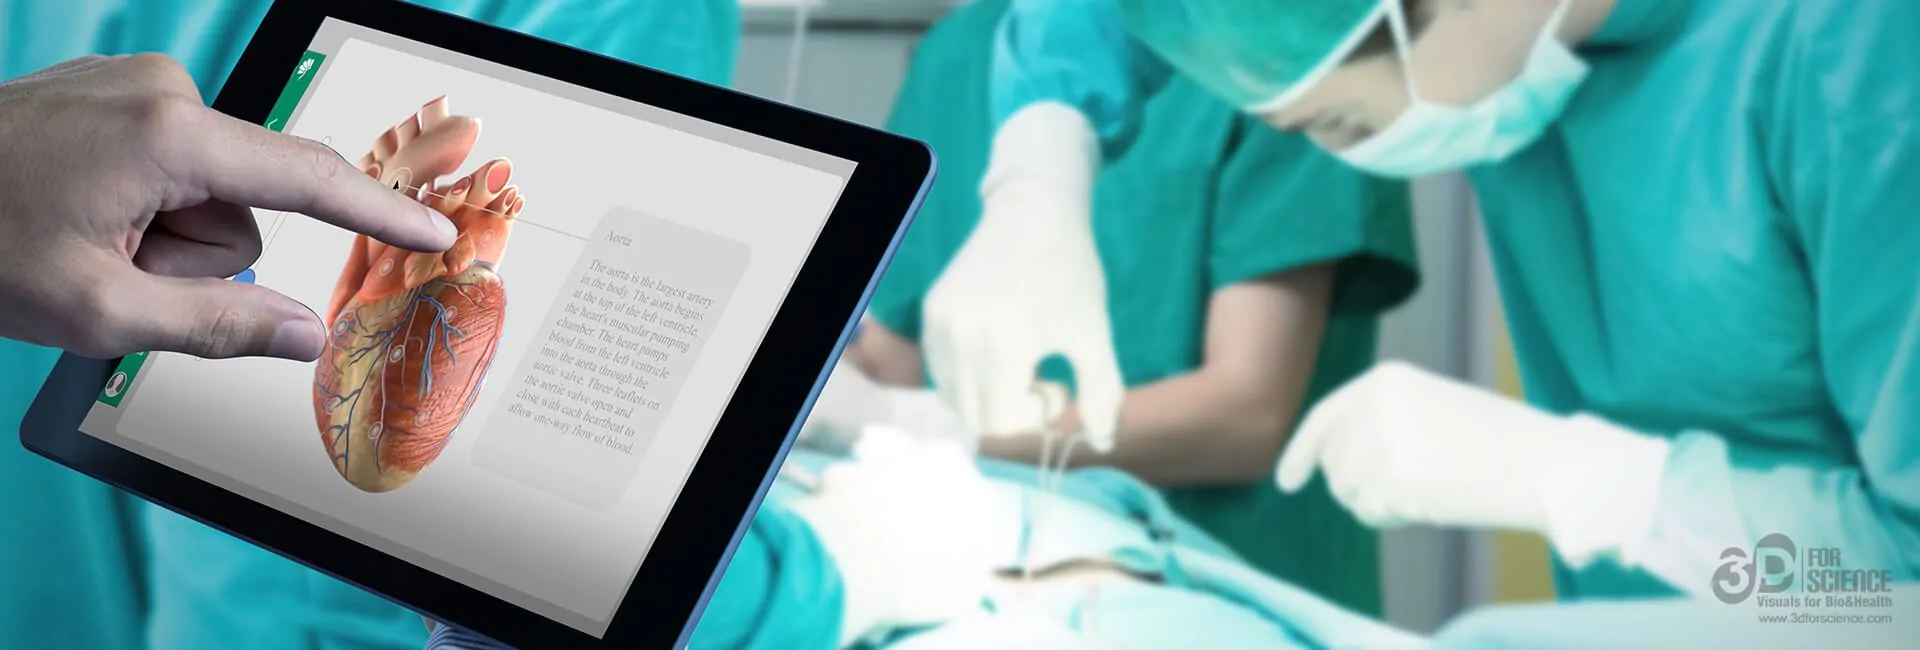 doctor using a medical interactive application in tablet